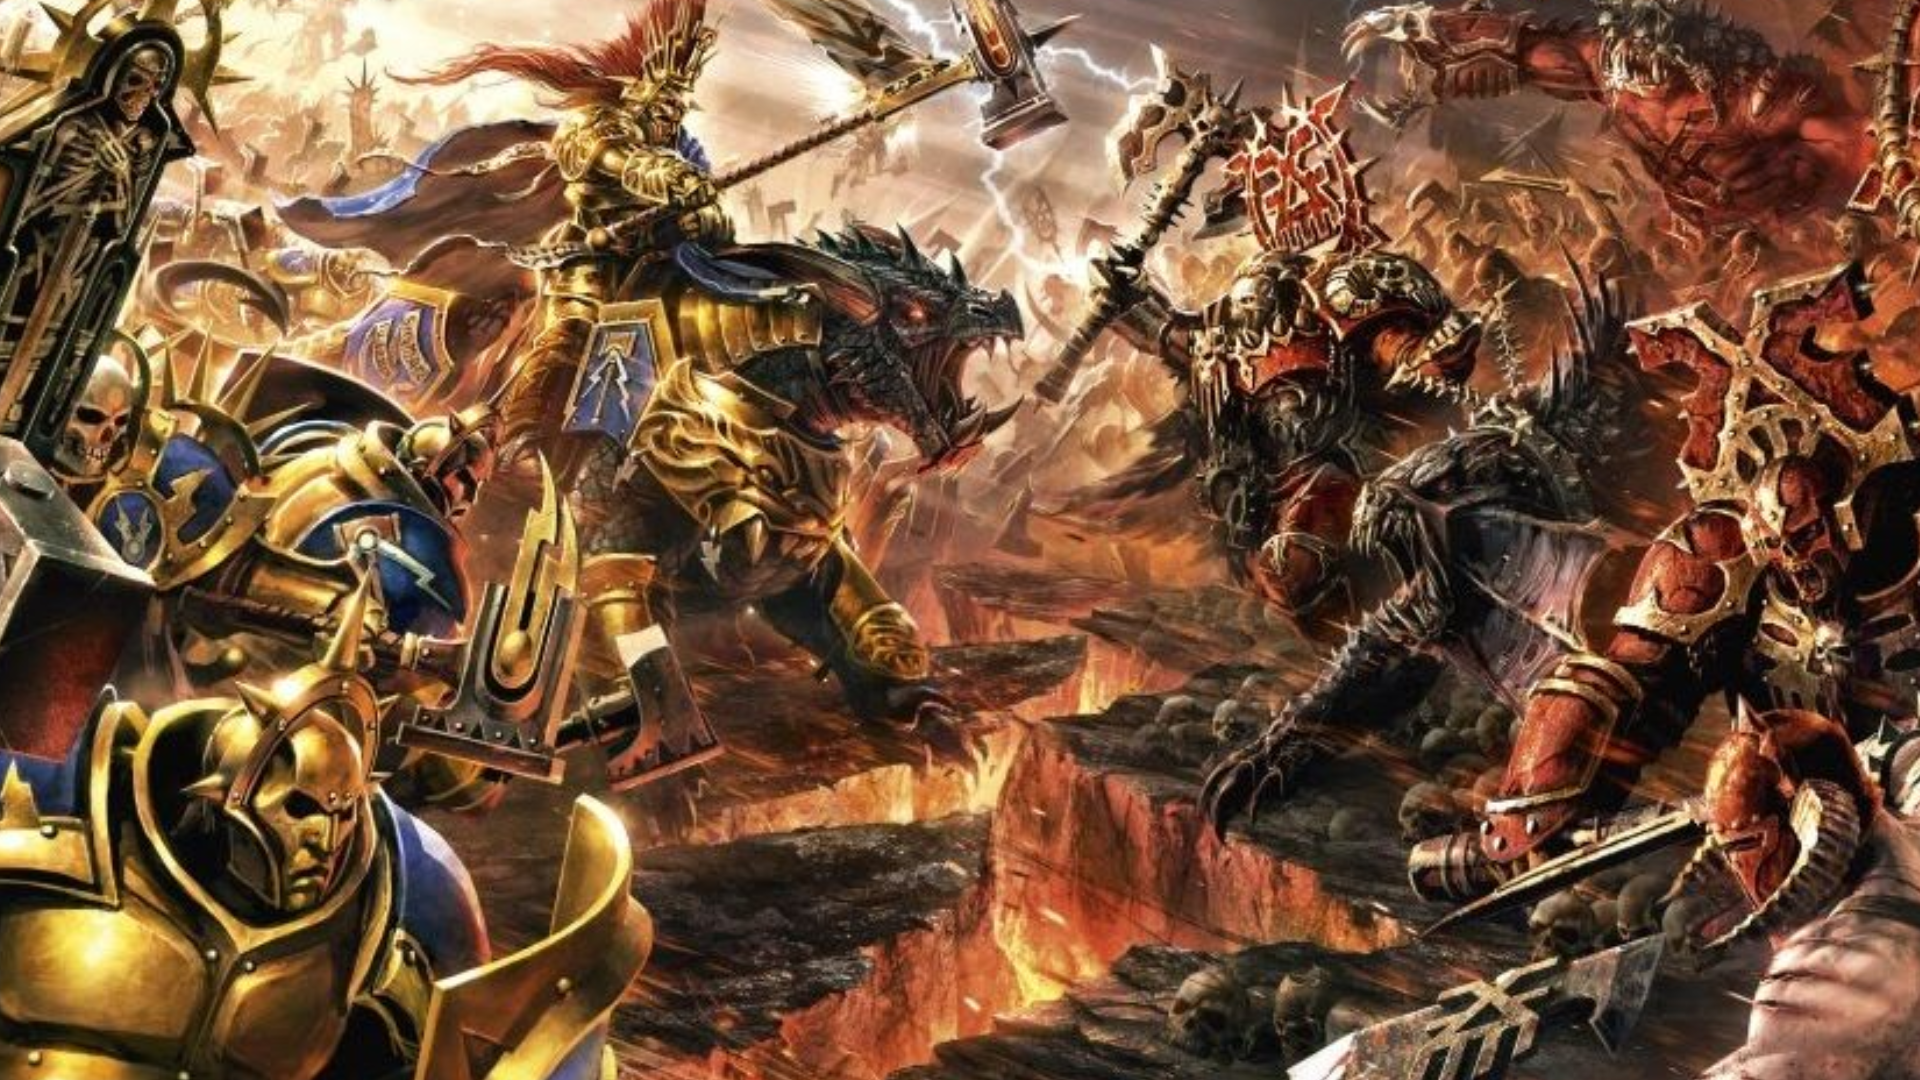 /blogs/news/ever-wanted-to-play-age-of-sigmar-heres-how-to-get-started